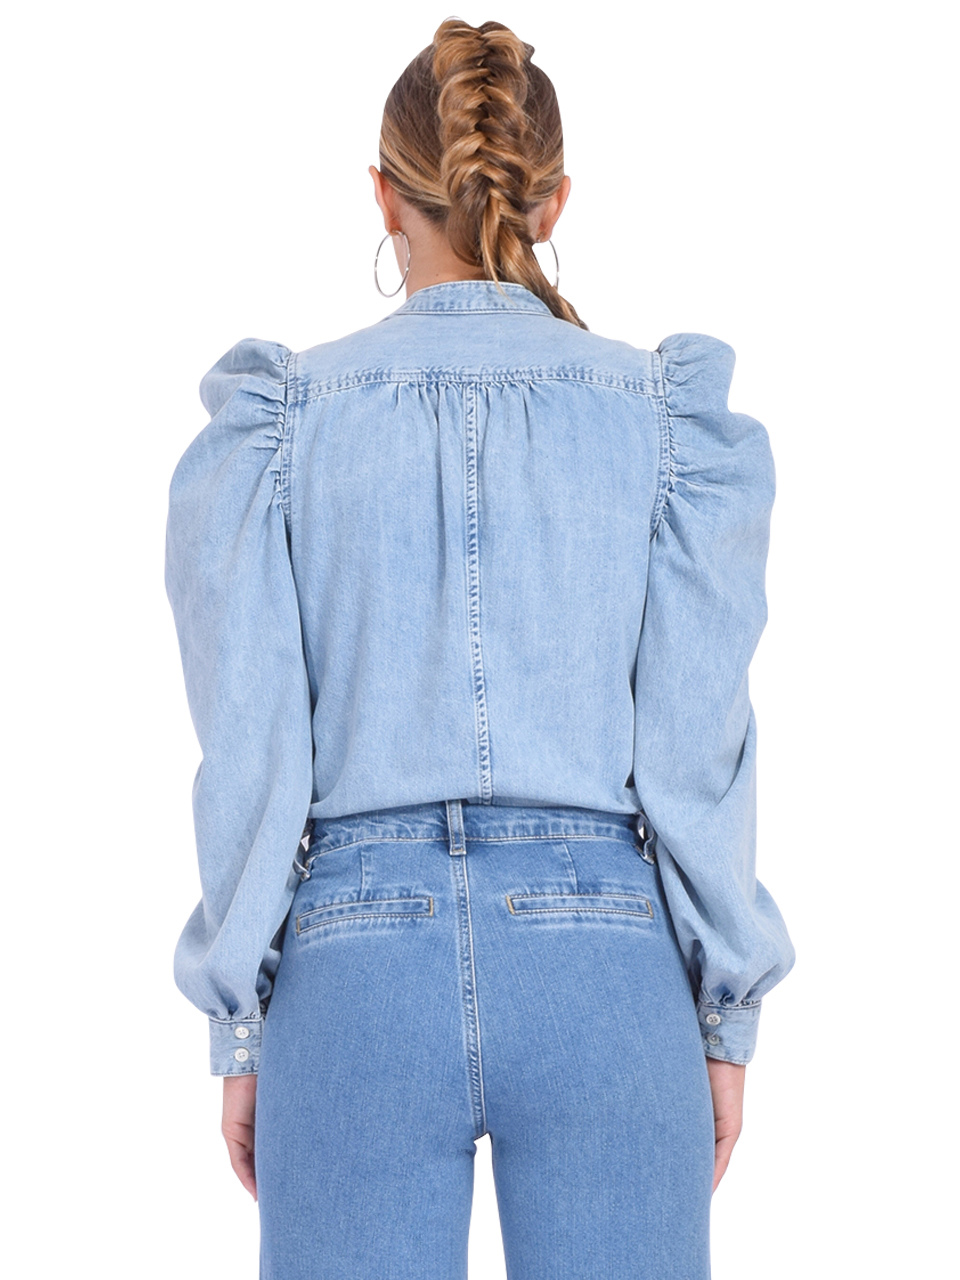 FRAME Gillian Long Sleeve Top in Cresthaven Blue Back View 